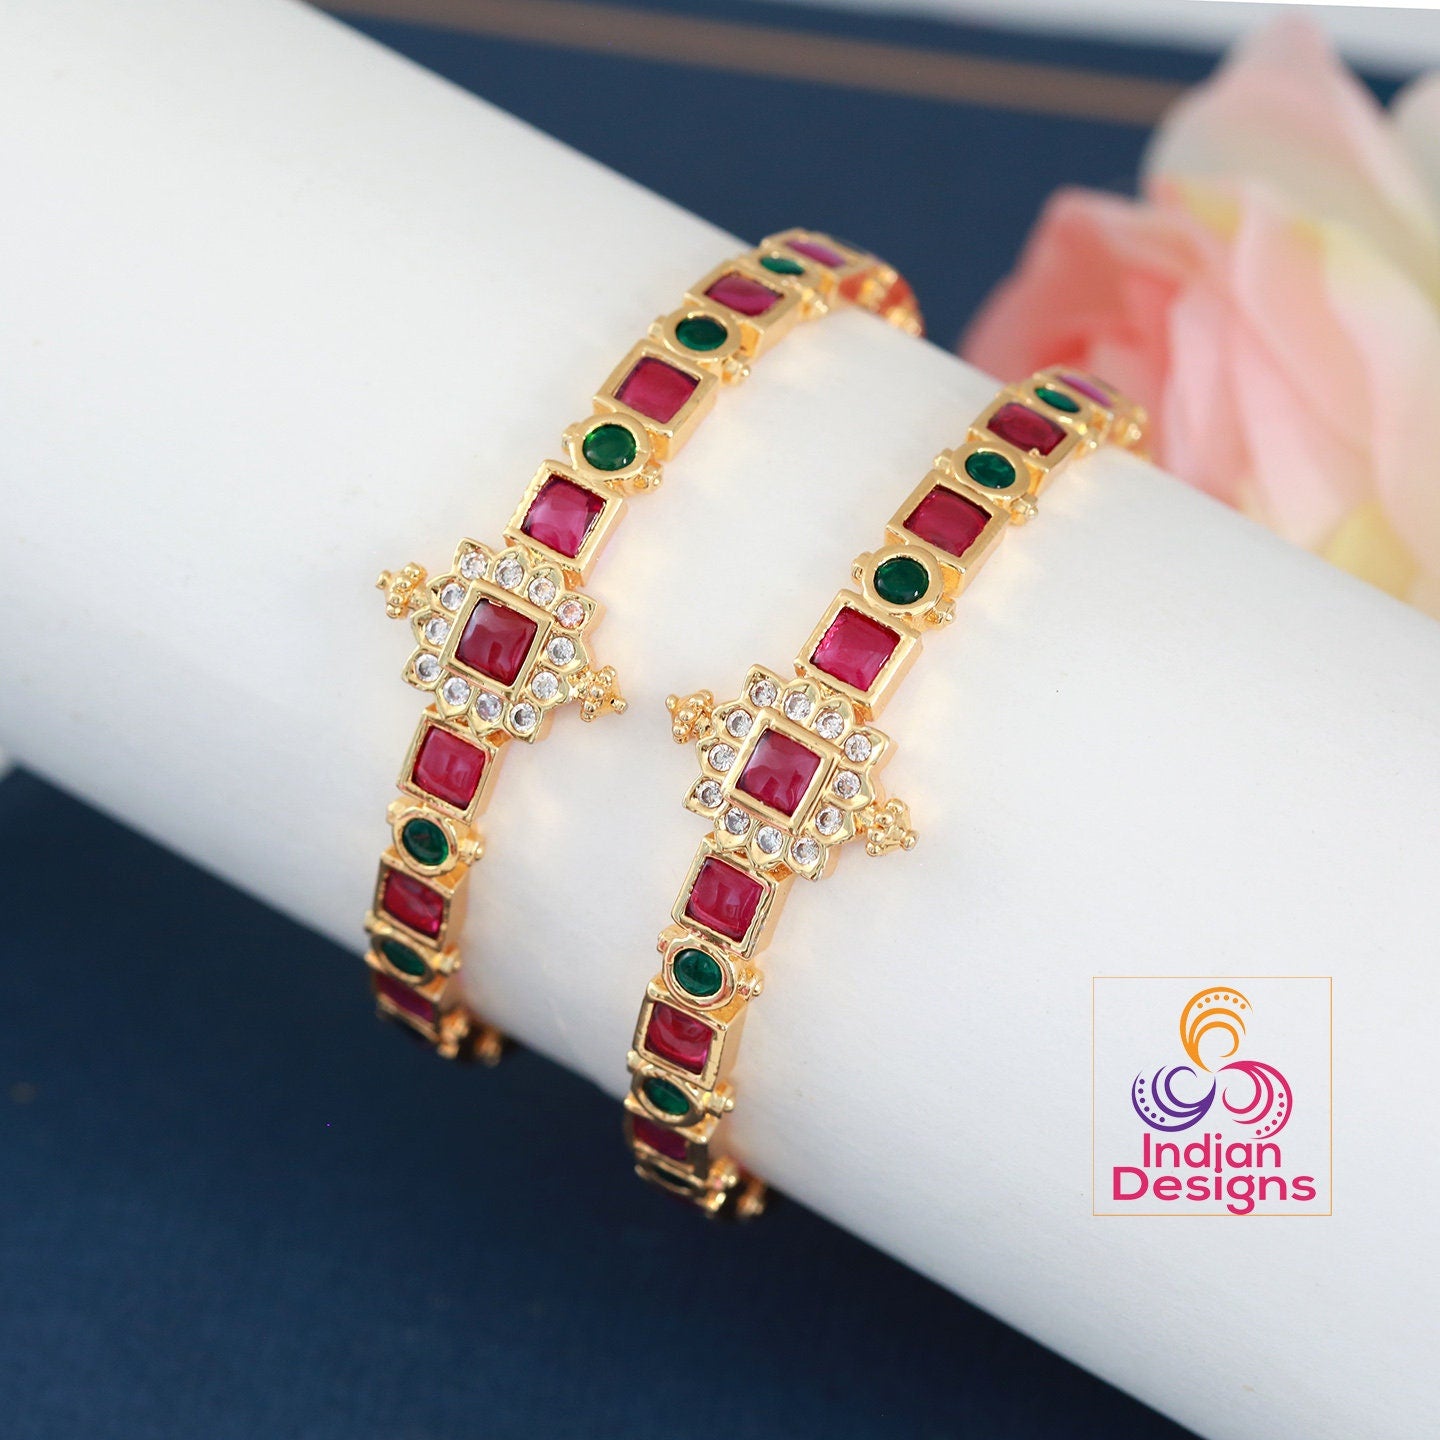 Pair of High quality Gold finish Ruby Green kemp bangles | South Indian Style Traditional jewelry Bangles | Gold bangle bracelet for women